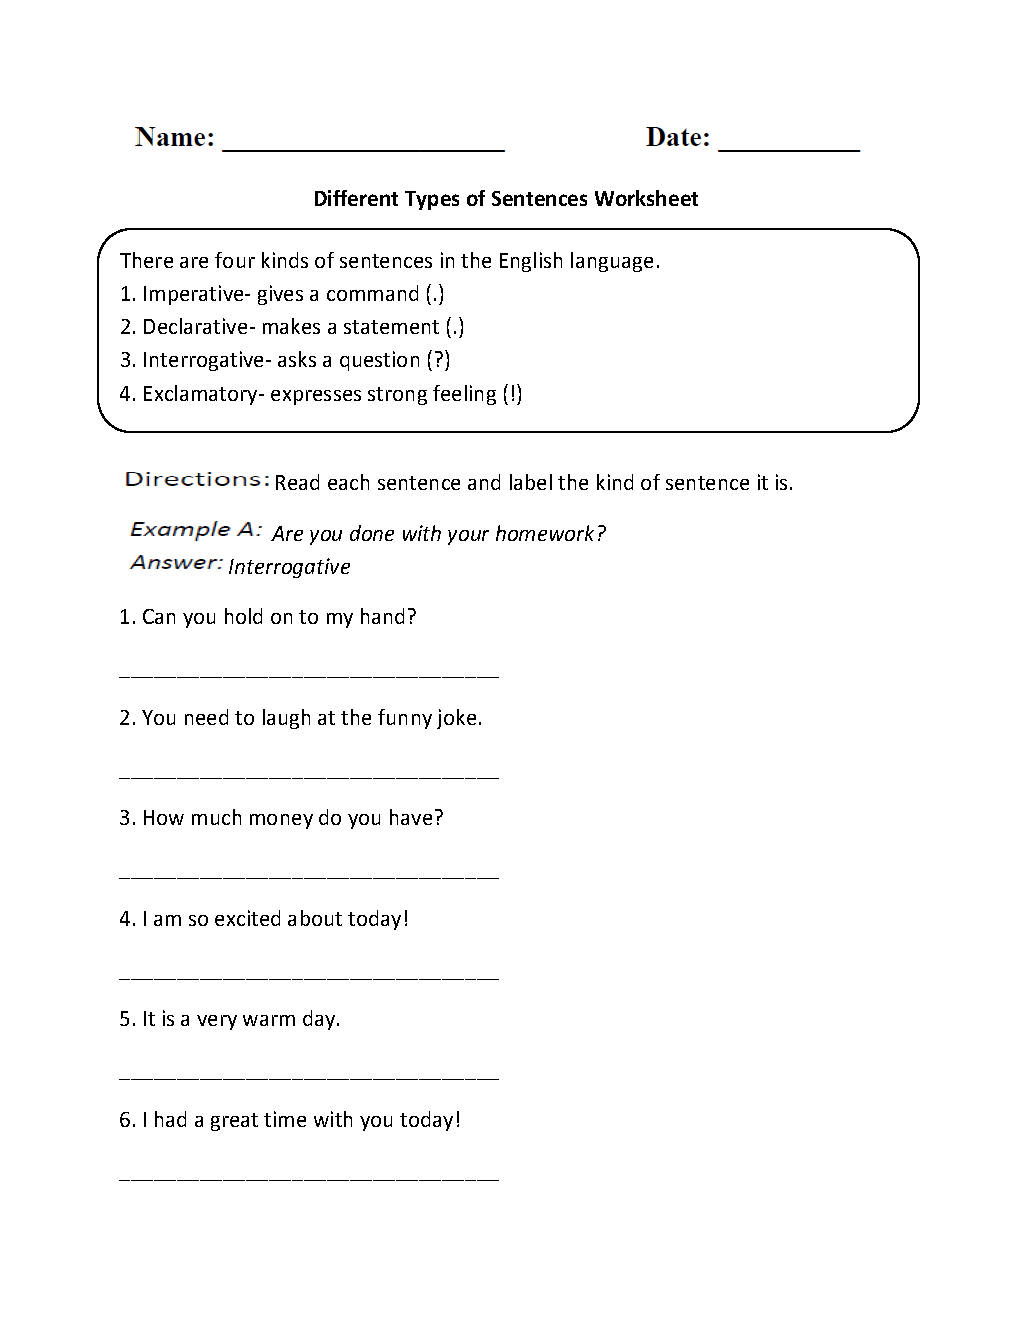 sentence-types-worksheet-with-answers